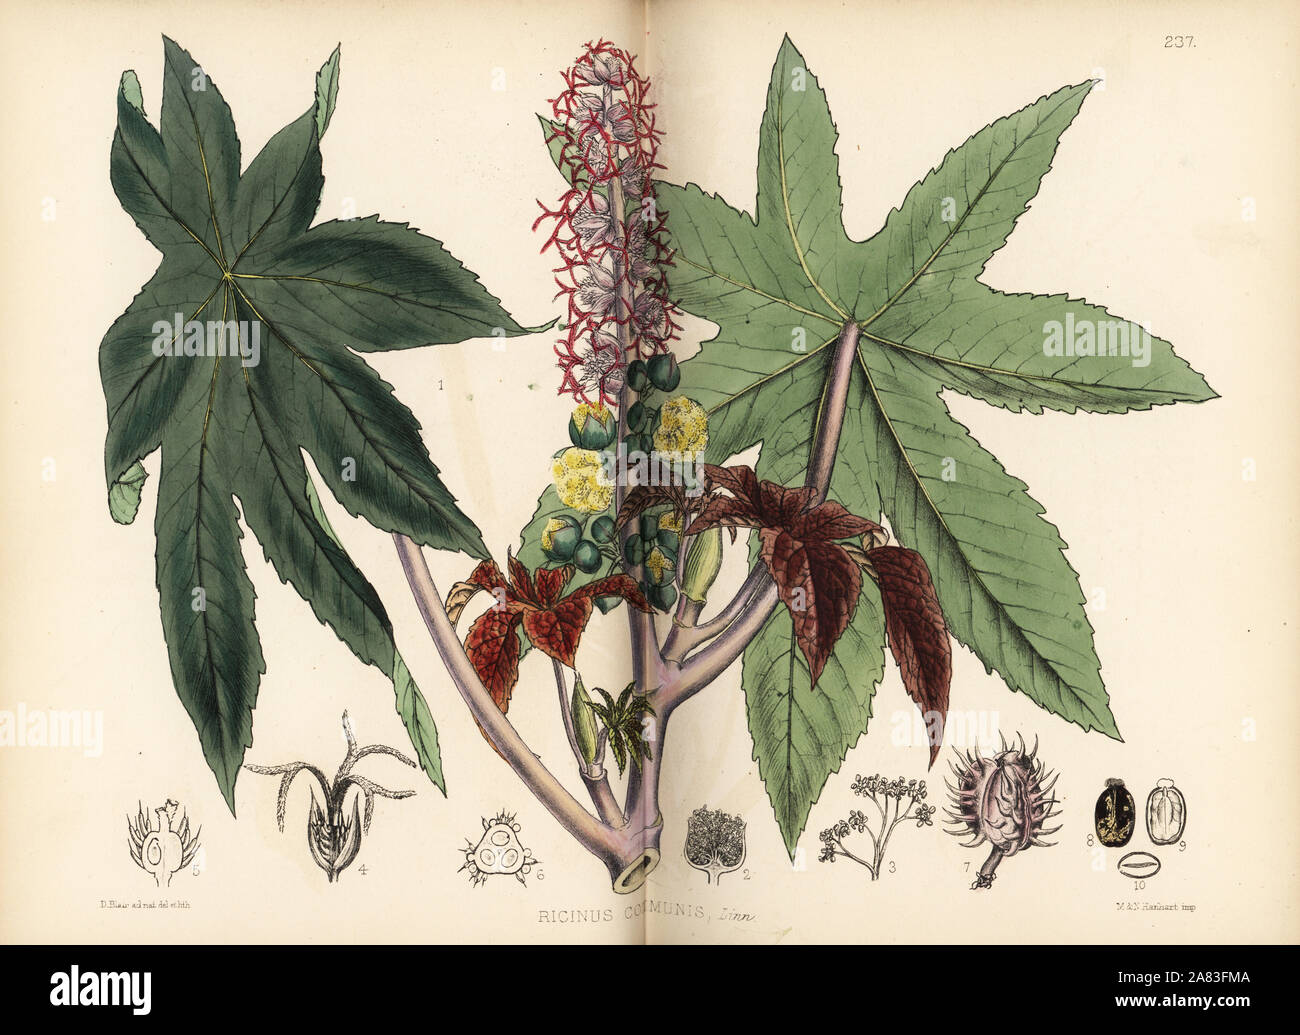 Castor oil or palma-christi, Ricinus communis. Handcoloured lithograph by Hanhart after a botanical illustration by David Blair from Robert Bentley and Henry Trimen's Medicinal Plants, London, 1880. Stock Photo